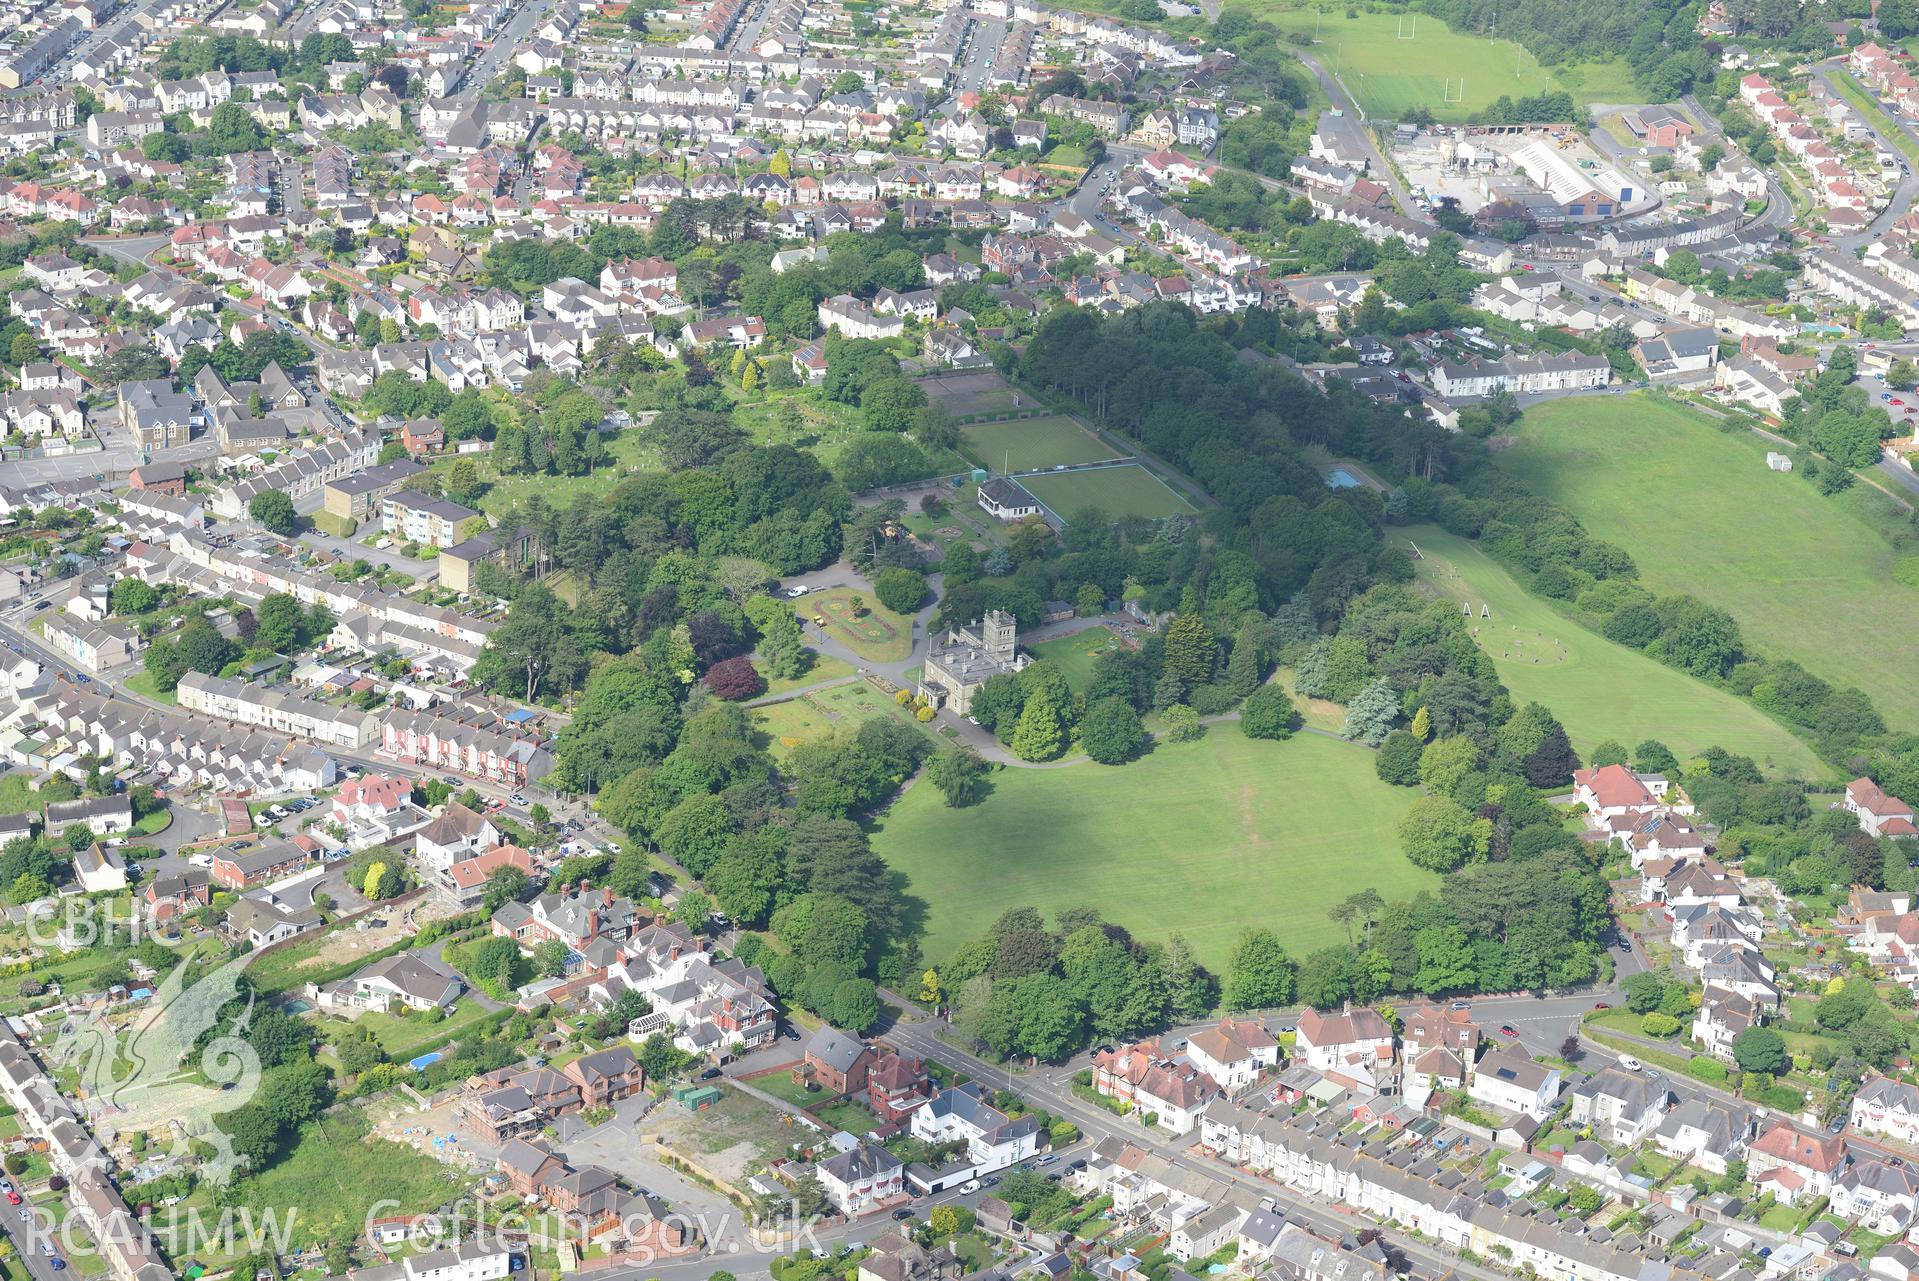 Bryncaerau Castle (now Parc Howard Museum); Parc Howard Gardens and the grounds and gardens of Bryncaerau, on the north western outskirts of Llanelli. Oblique aerial photograph taken during the Royal Commission's programme of archaeological aerial reconnaissance by Toby Driver on 19th June 2018